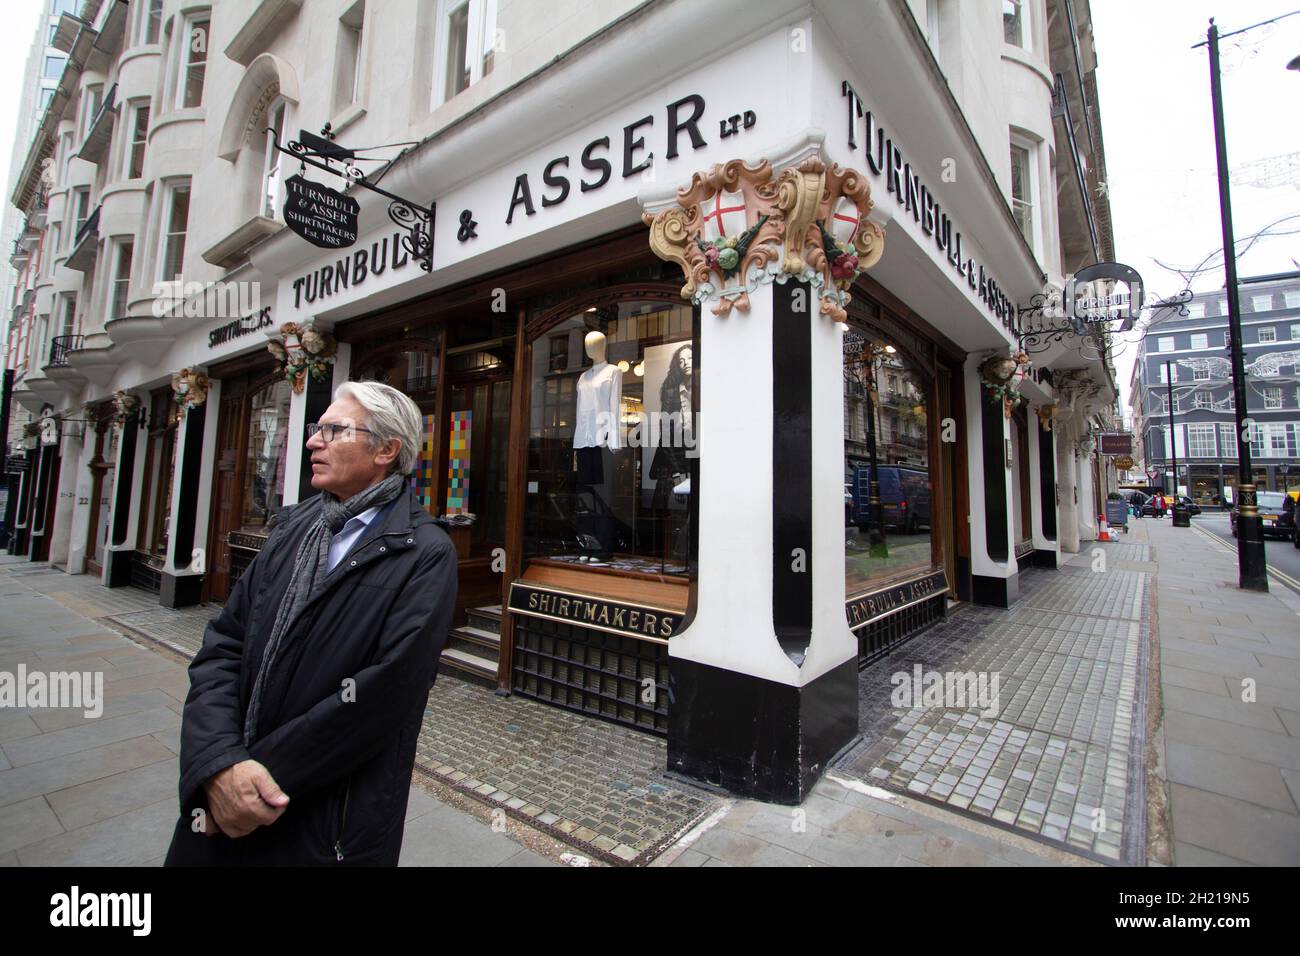 Asser and Turnbull is a bespoke shirtmaker established in 1885 Stock Photo